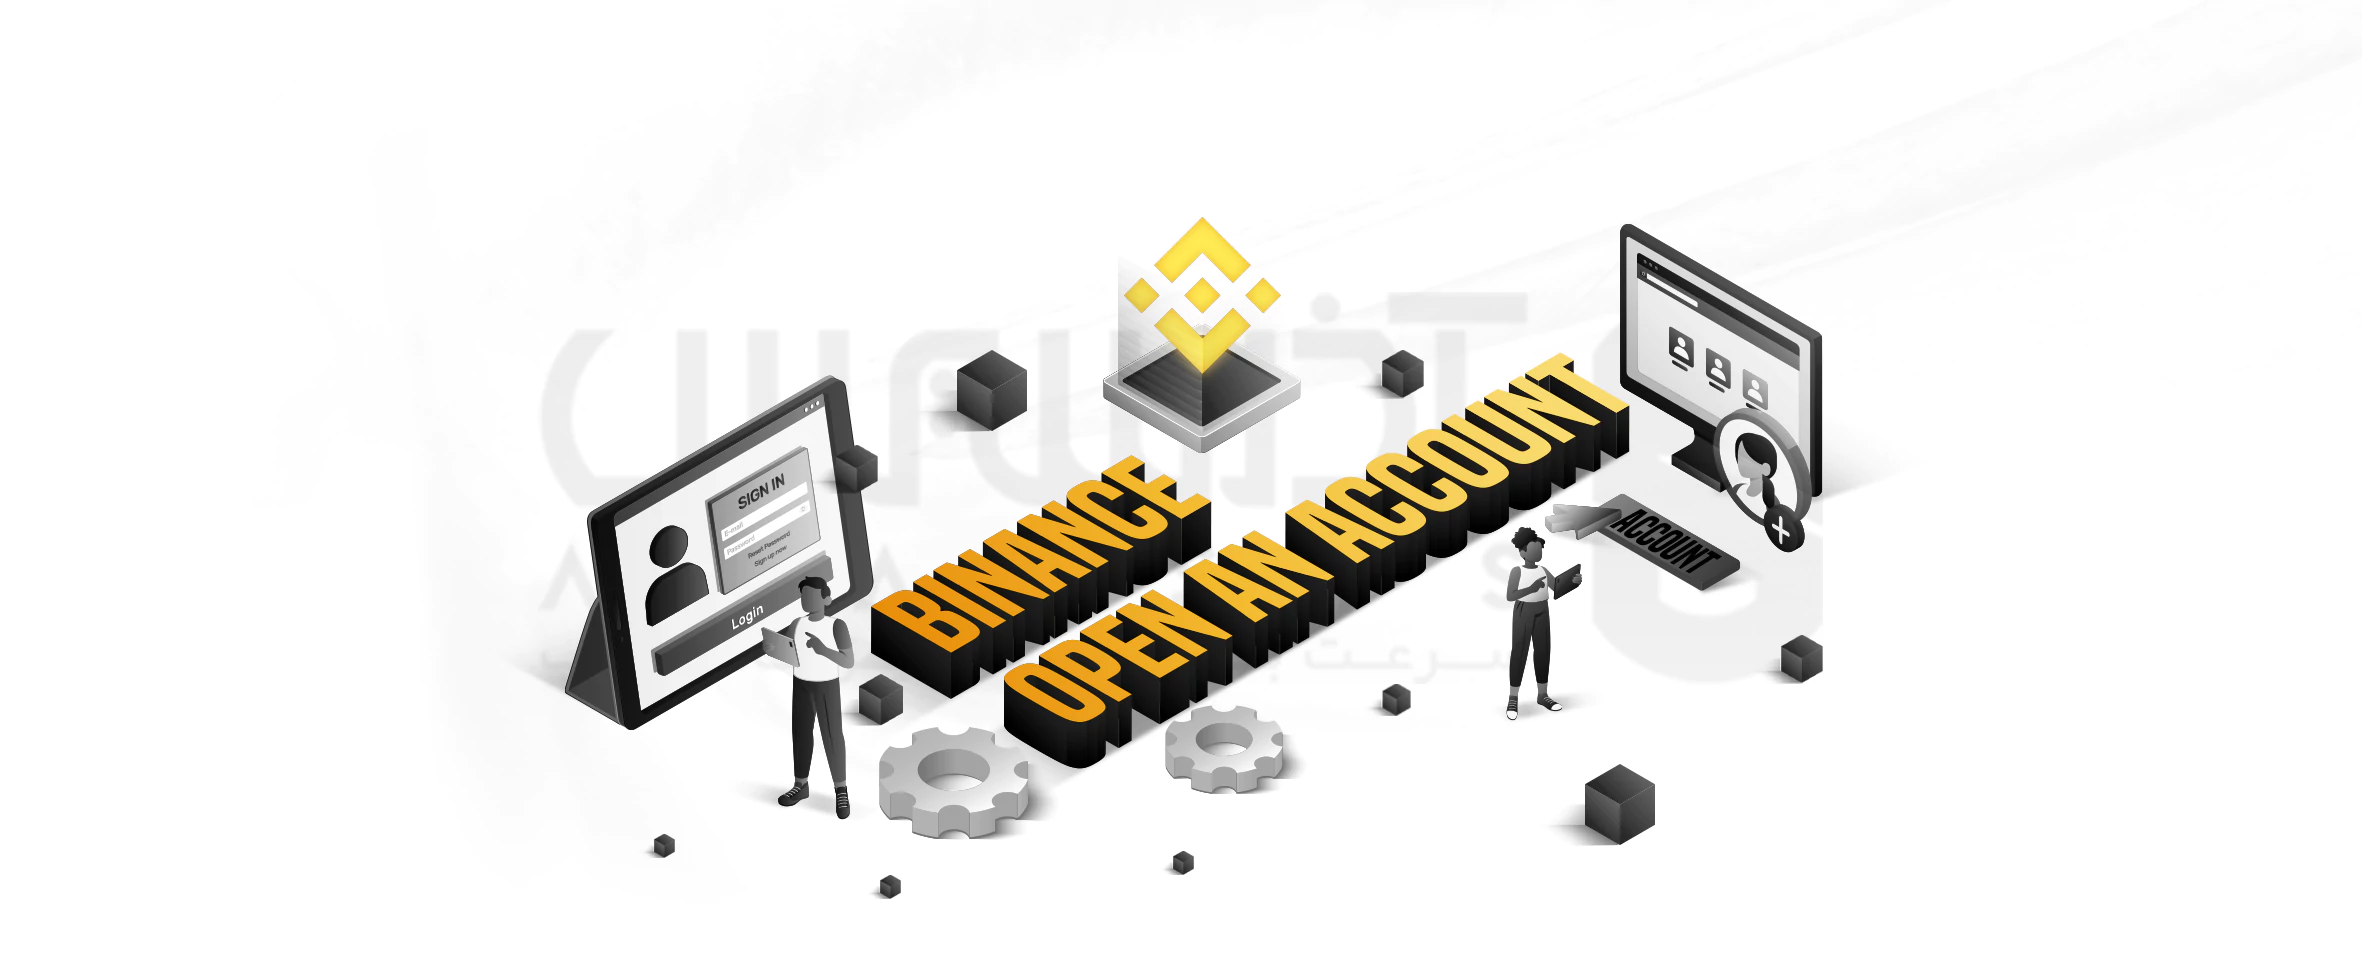 How to open an account on Binance